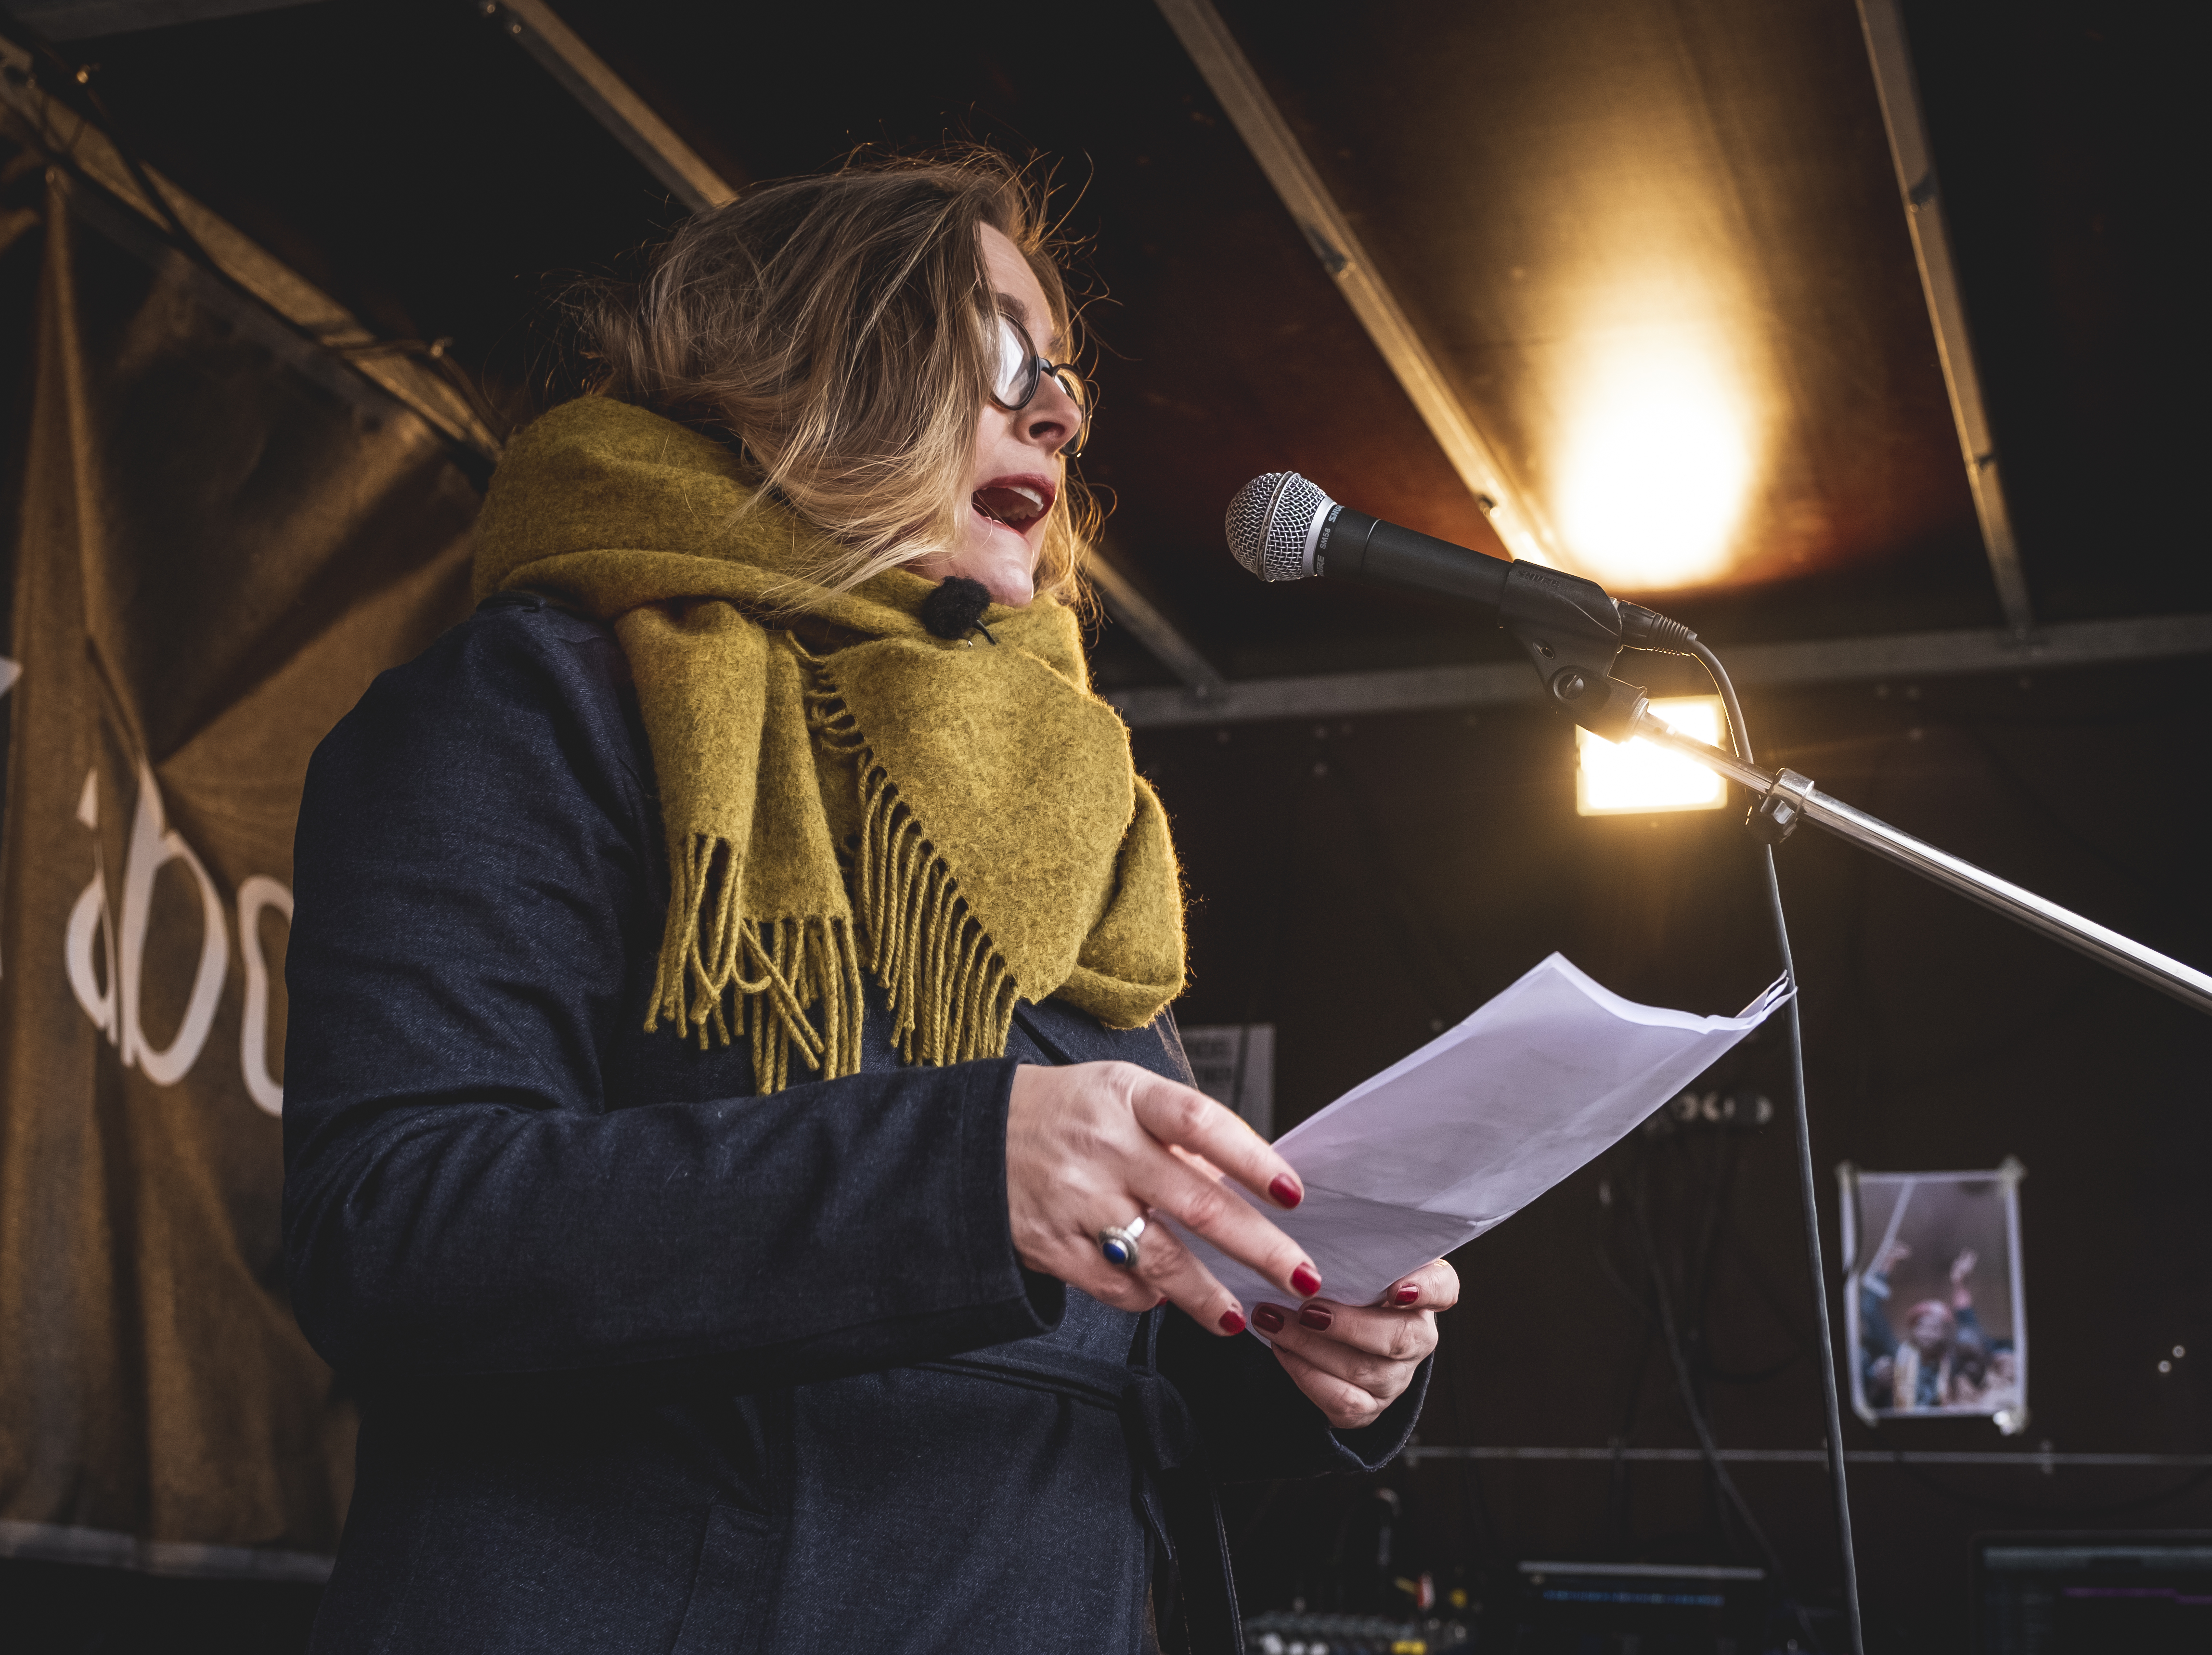 Rape survivor Kirstine Holst speaking at a consent demo in Denmark, campaigning with Amnesty to get the government to adopt consent based rape laws. (© Jonas Persson)